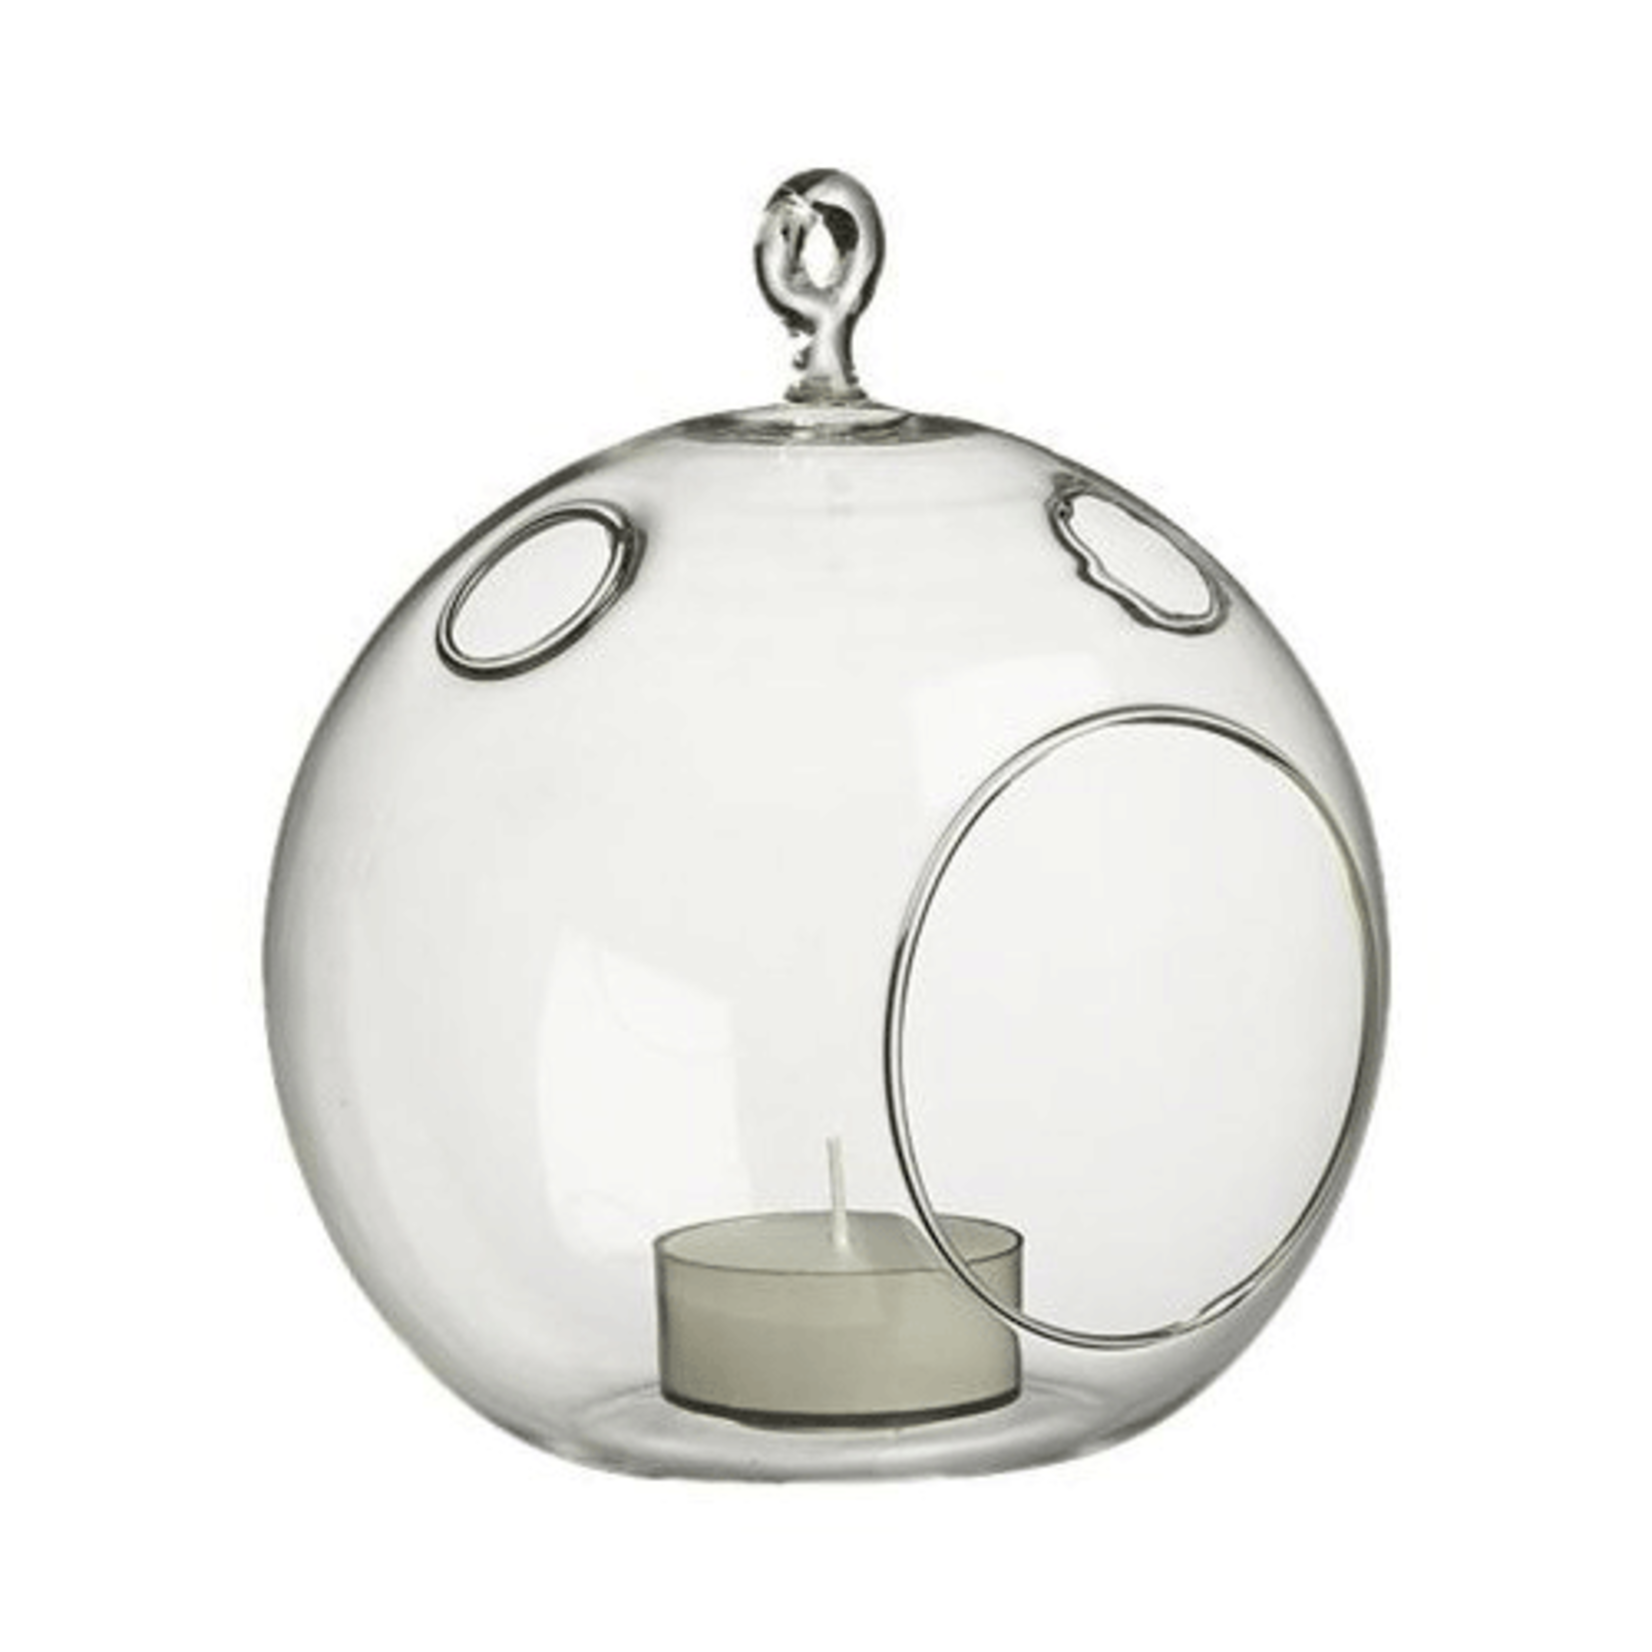 Clear Round Hanging Votive Candle Holder / Vase. Width: 6". Height: 6.5". Open: 3.5"